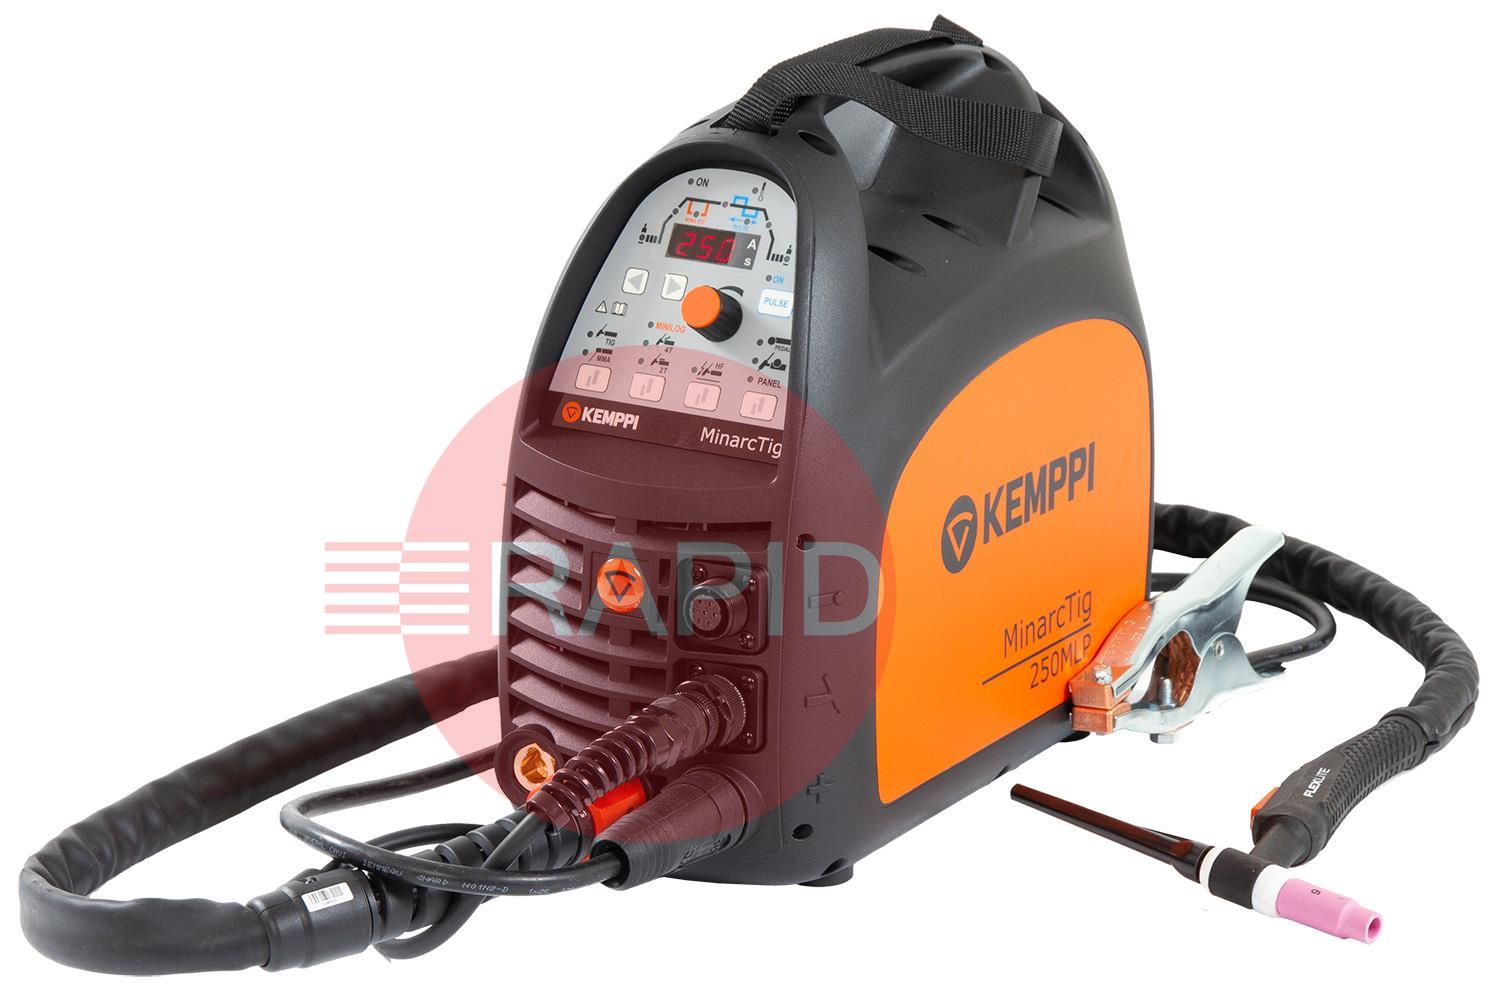 P0614TX  Kemppi MinarcTig 250 MLP with 8m TX225G8 Torch, Earth Cable & Gas Hose